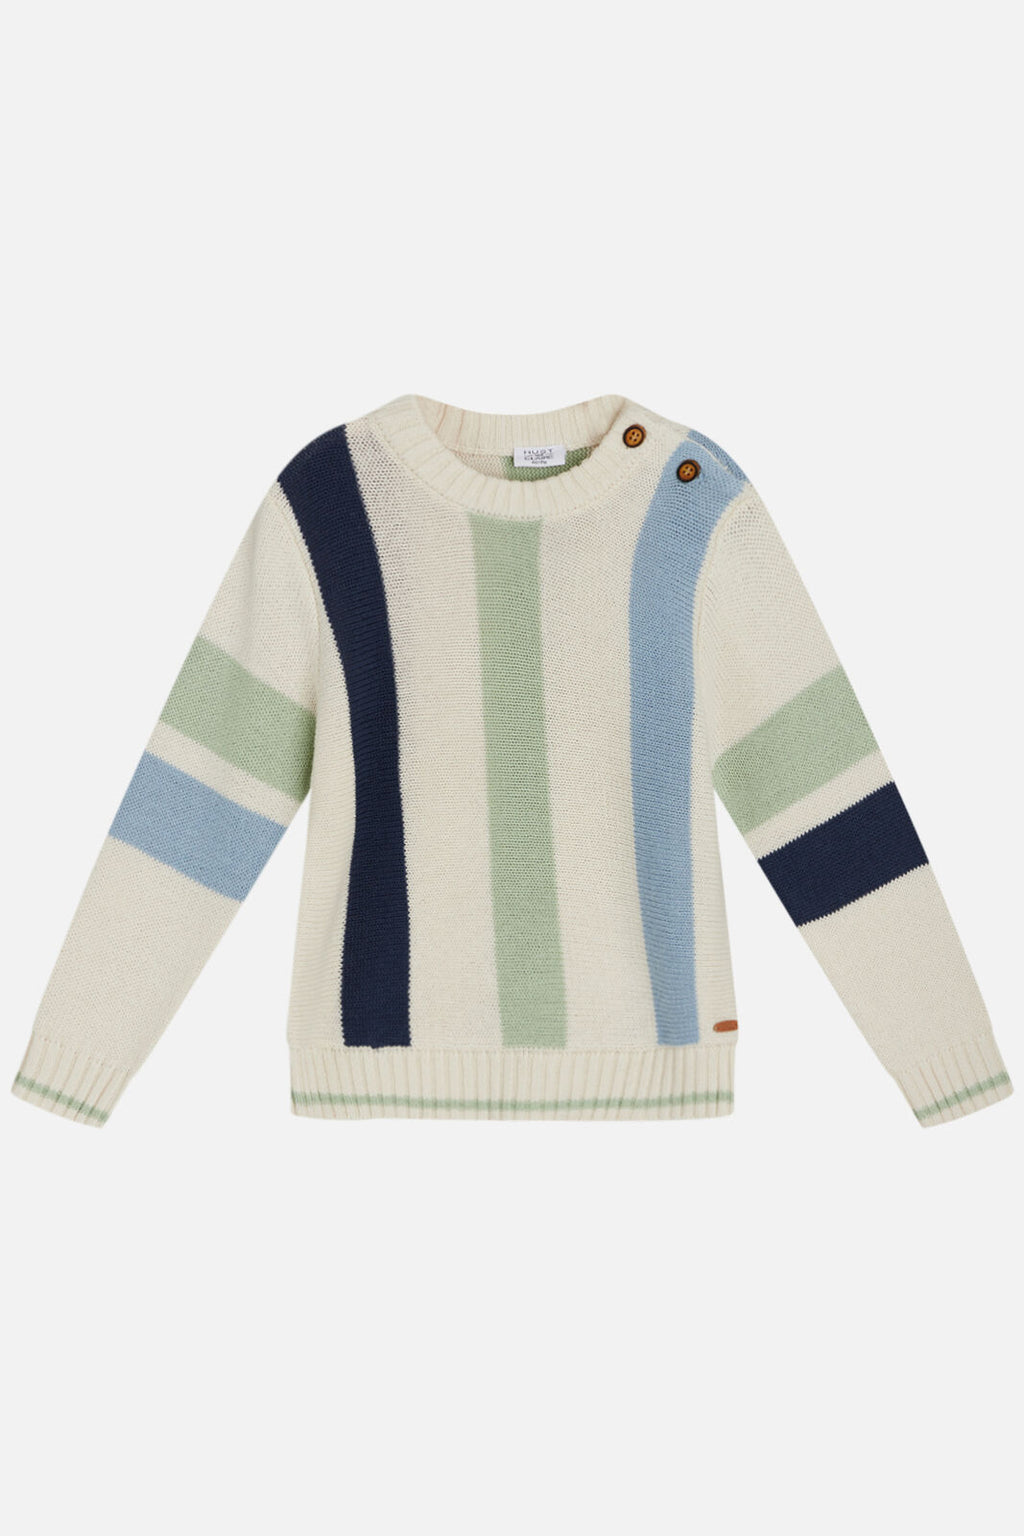 Hust and Claire Pelle Sweater Stripe